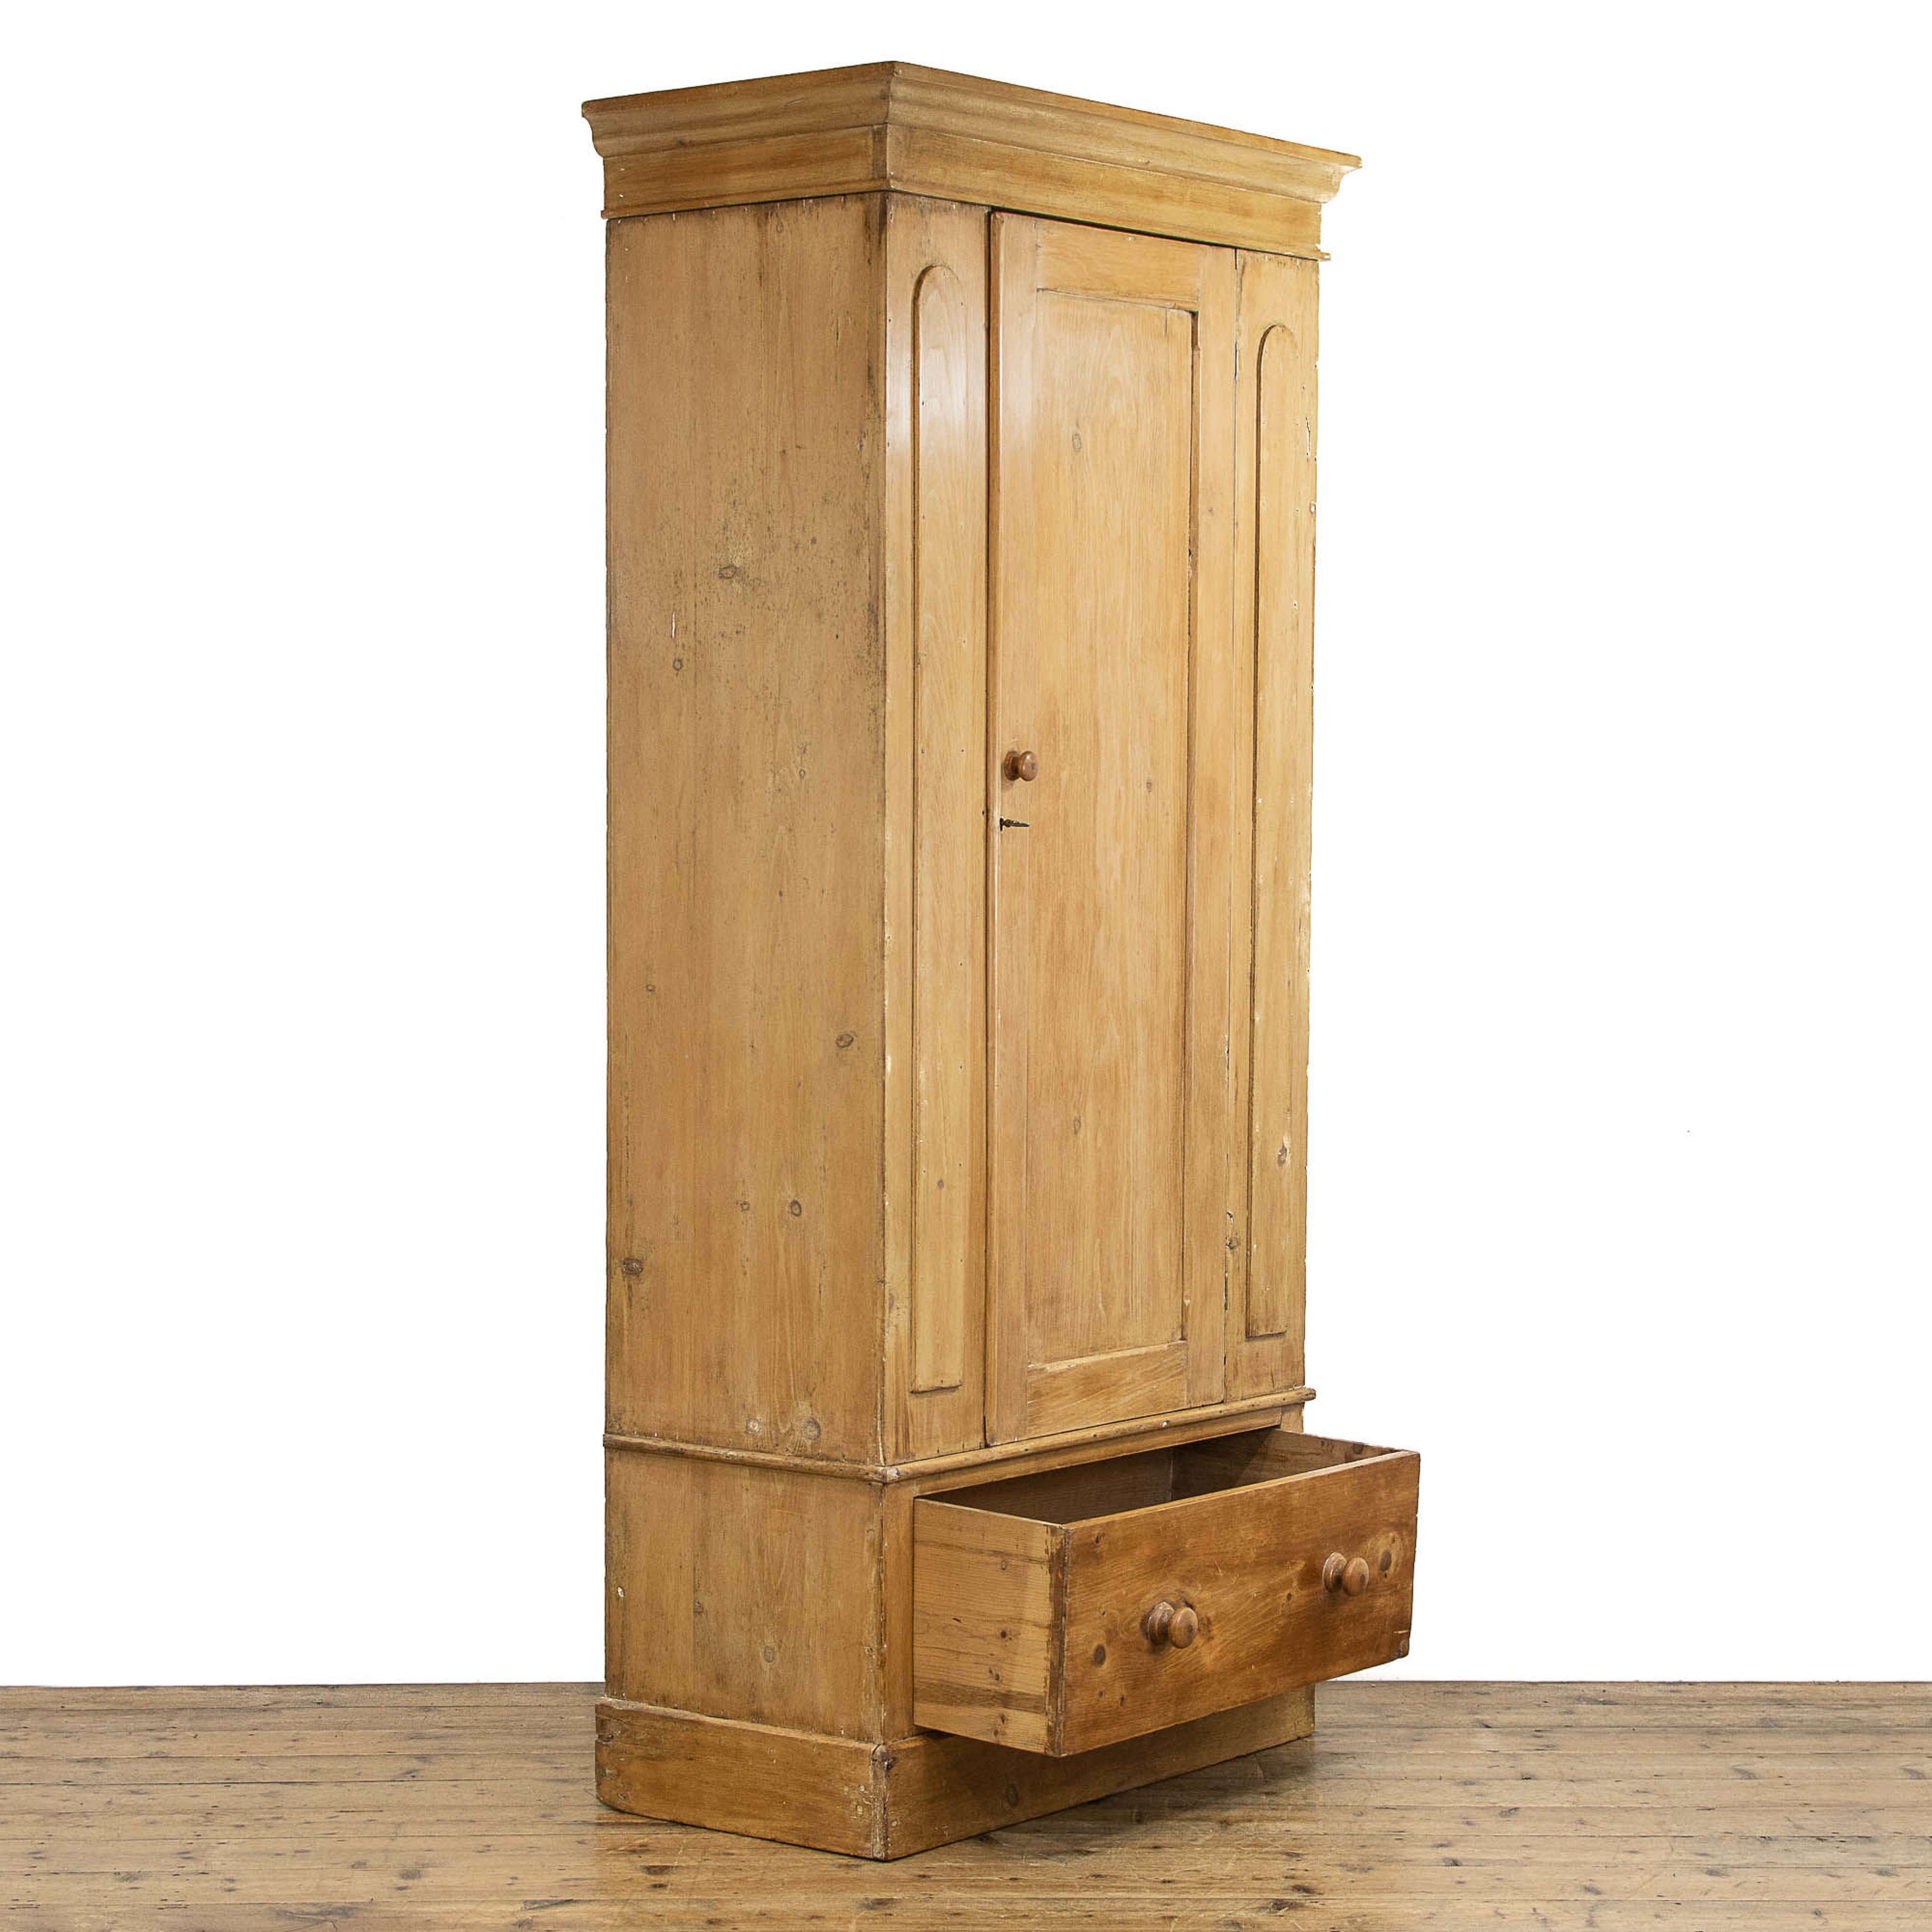 Victorian Stripped Pine Single Wardrobe In Antique Wardrobes & Armoires Pertaining To Single Pine Wardrobes (View 5 of 15)